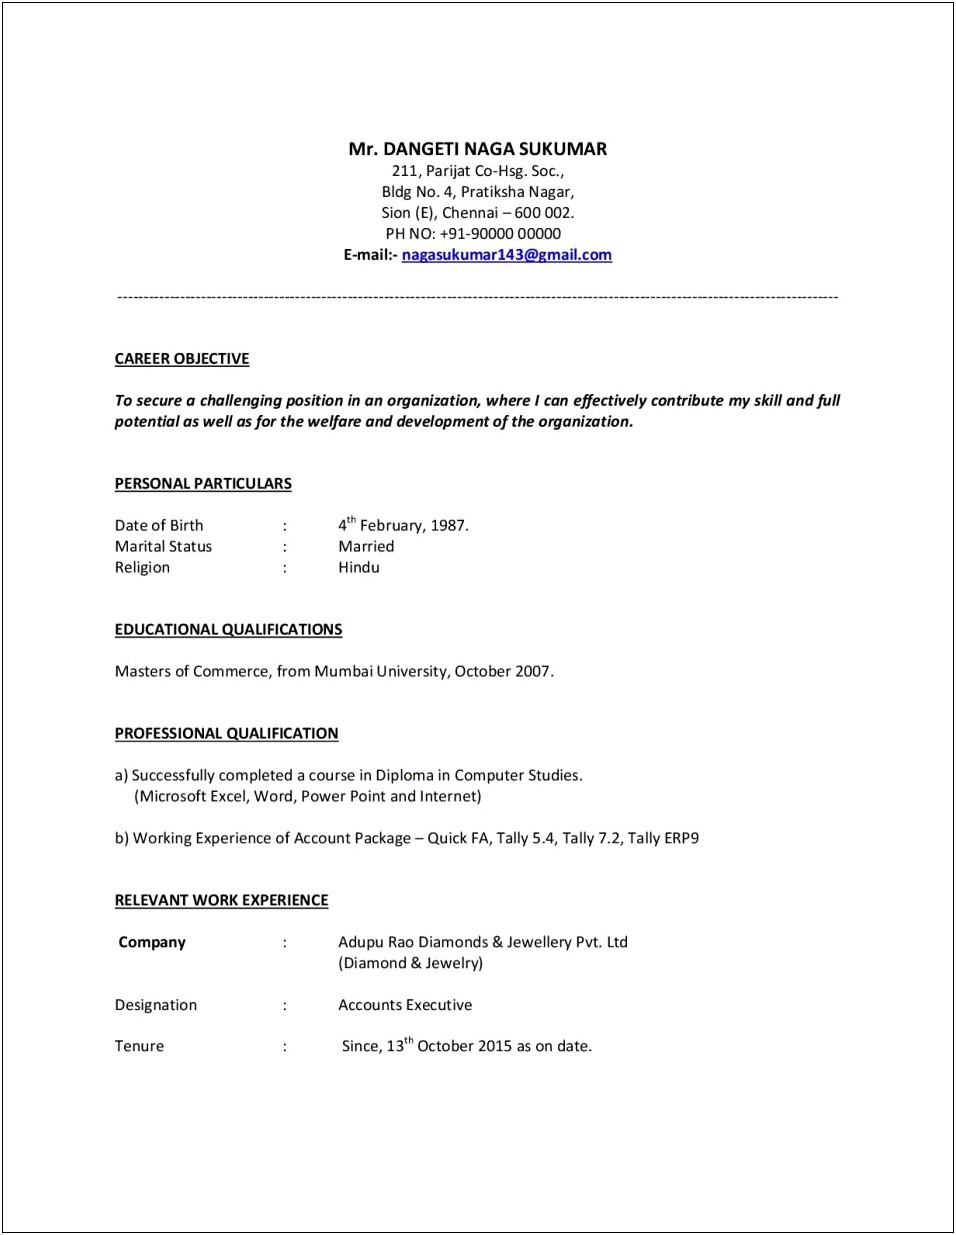 Management Anylist Sample Resume With 2 Years Experience